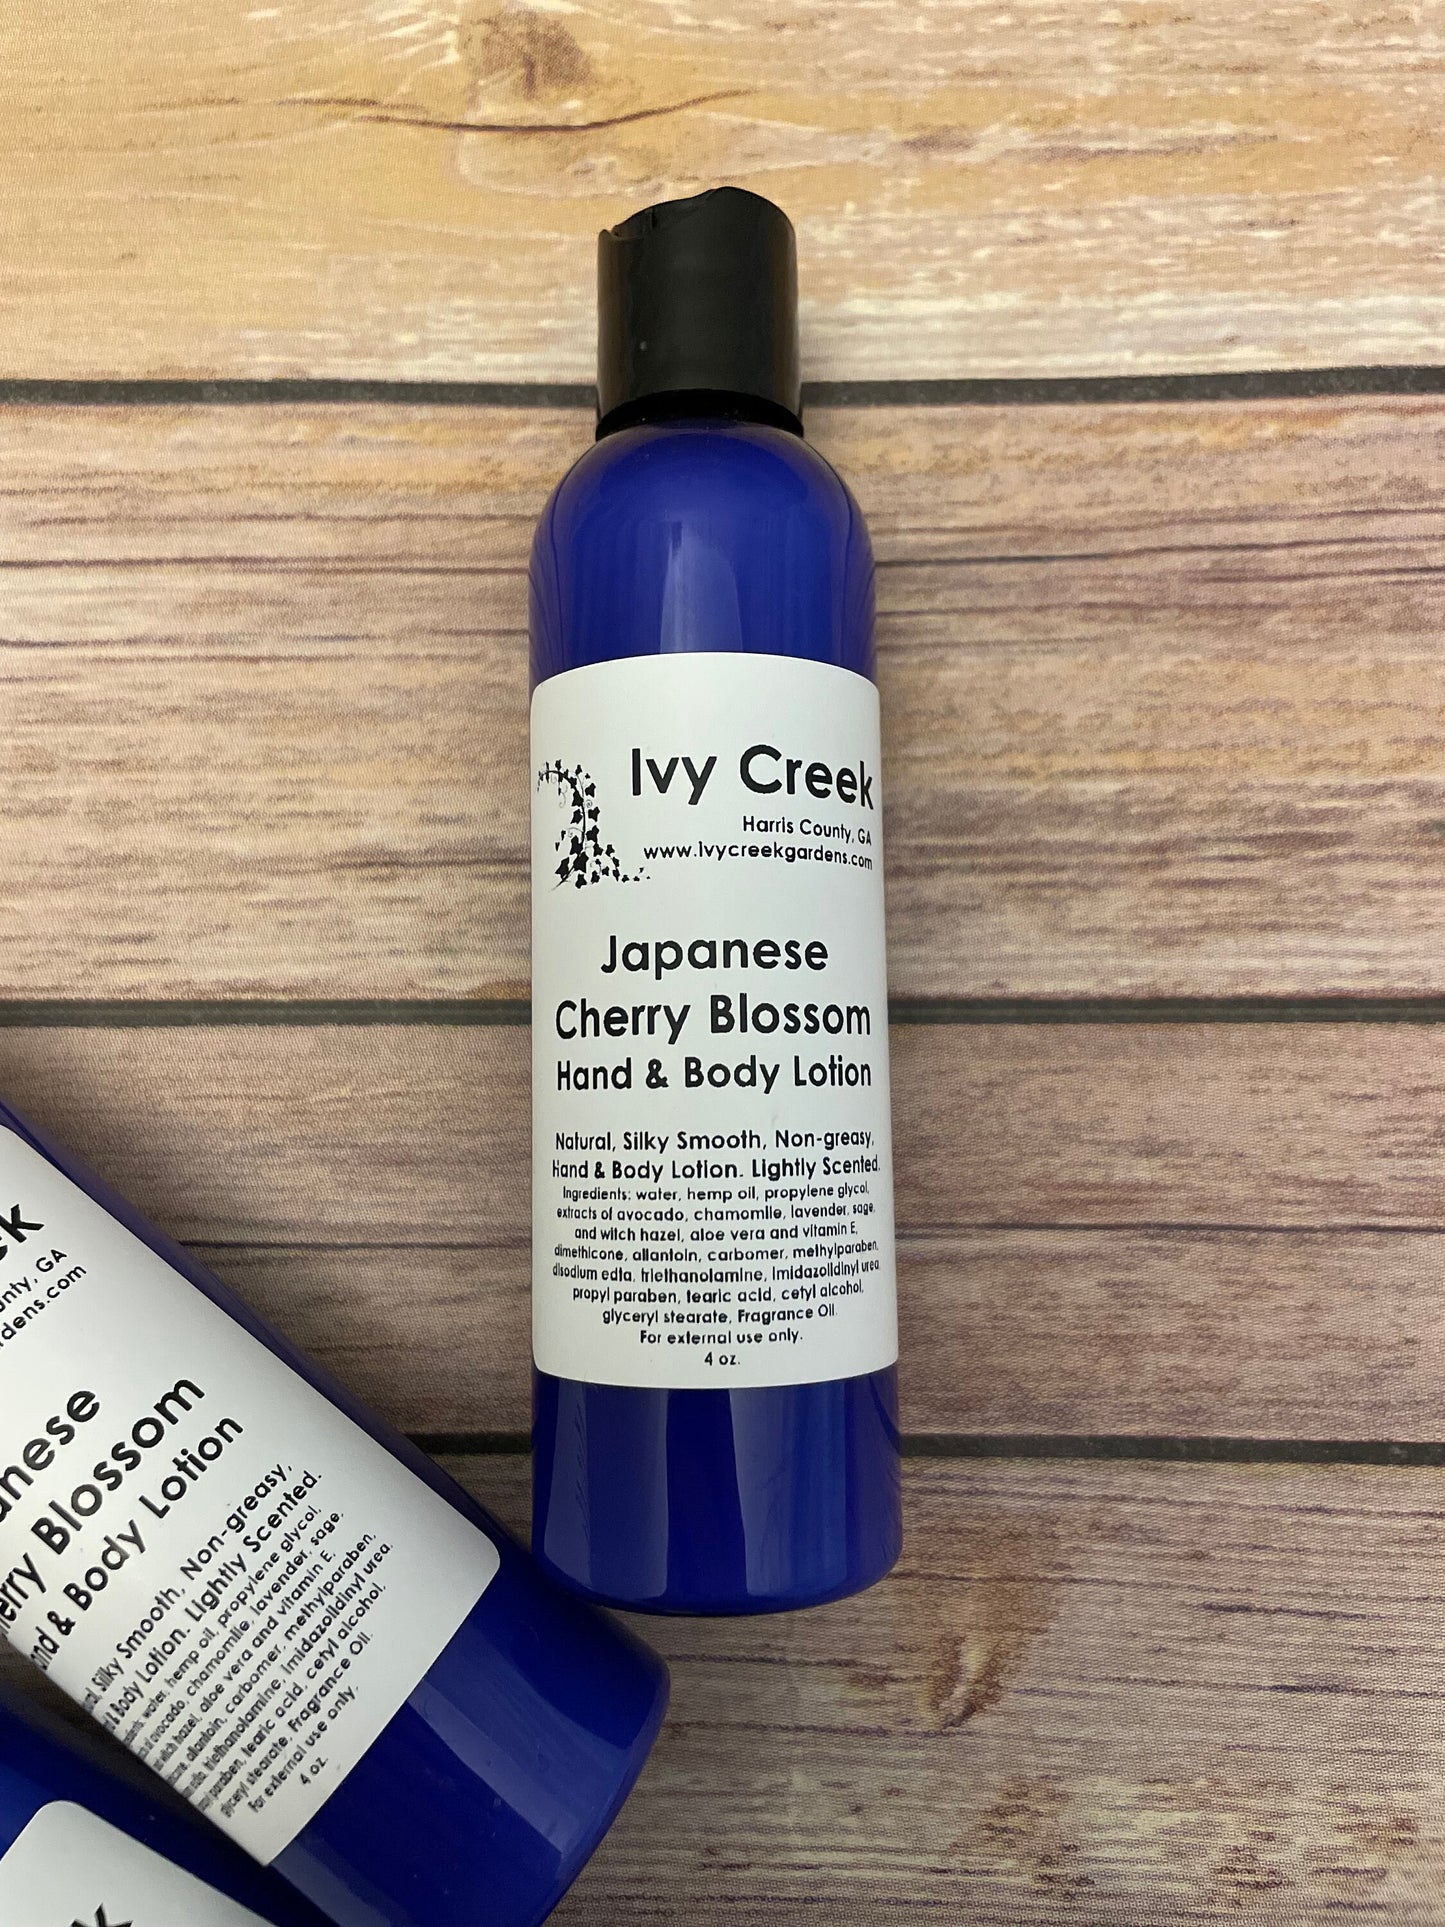 Ivy Creek Japanese Cherry Blossom Silky Smooth Hand & Body Lotion - All-Natural, Holistic, Lightly Scented - Ready to Ship - 4 oz